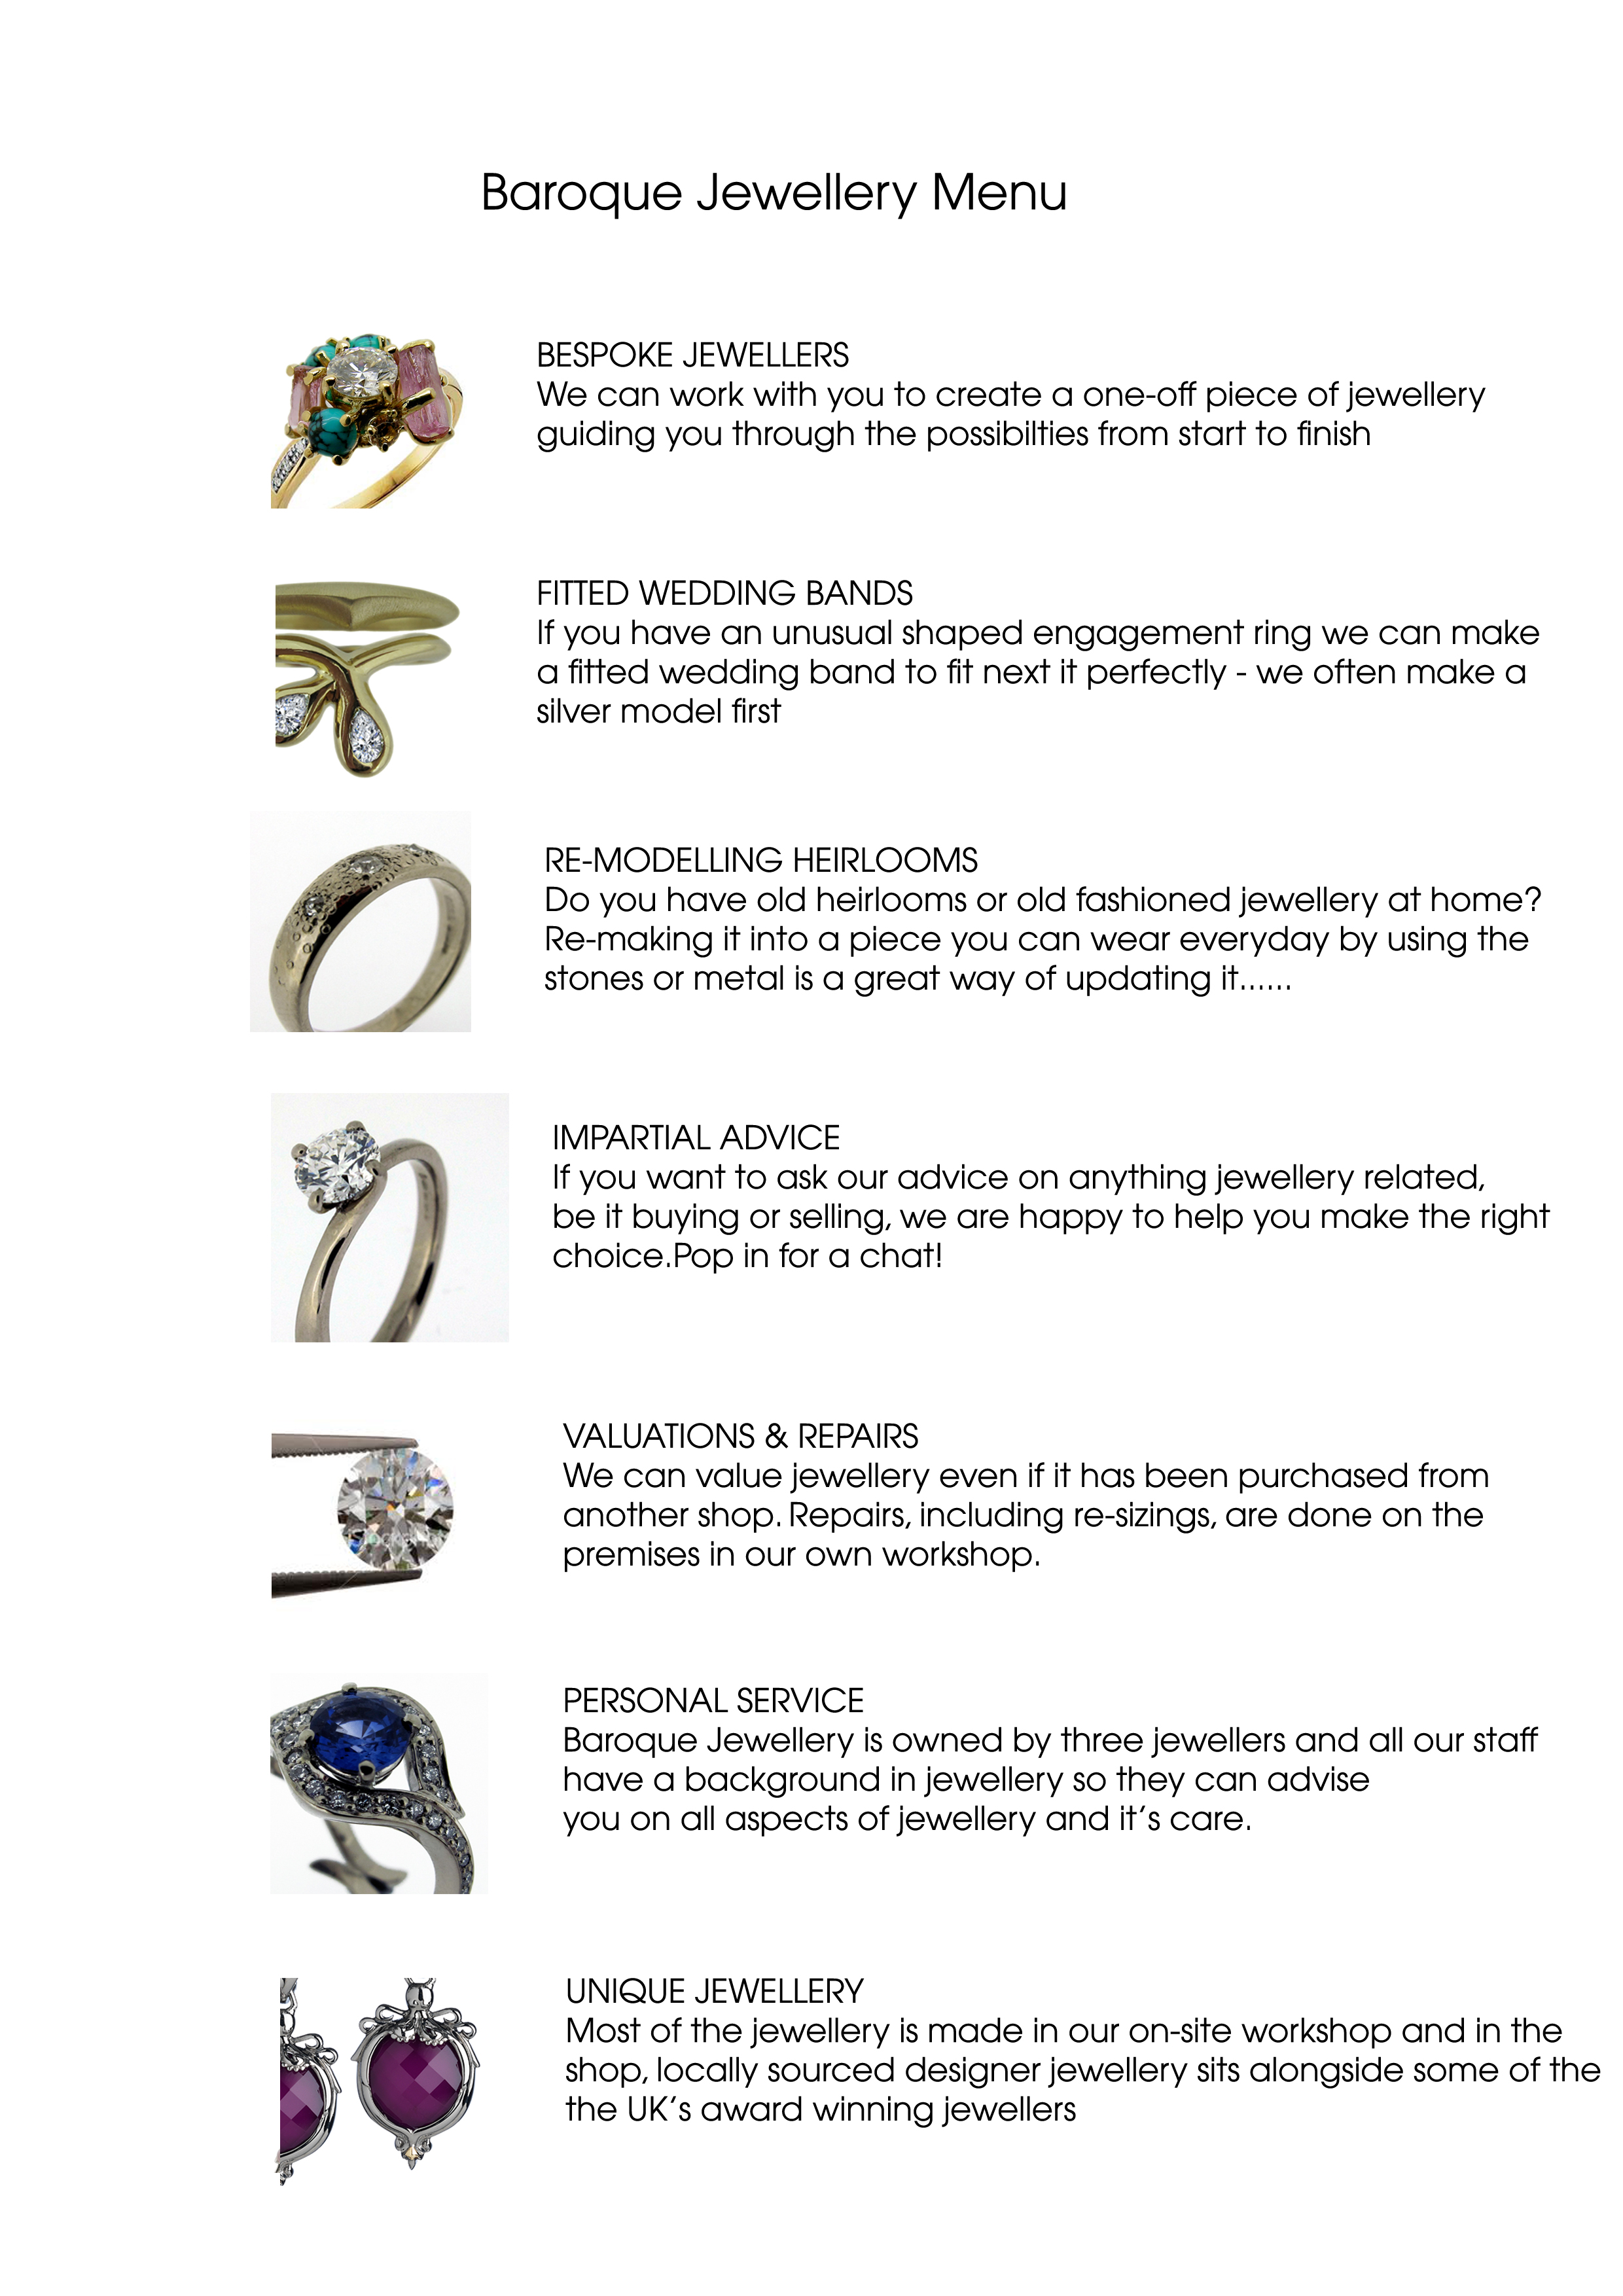 Baroque Jewellery Menu of what services we offer in the shop